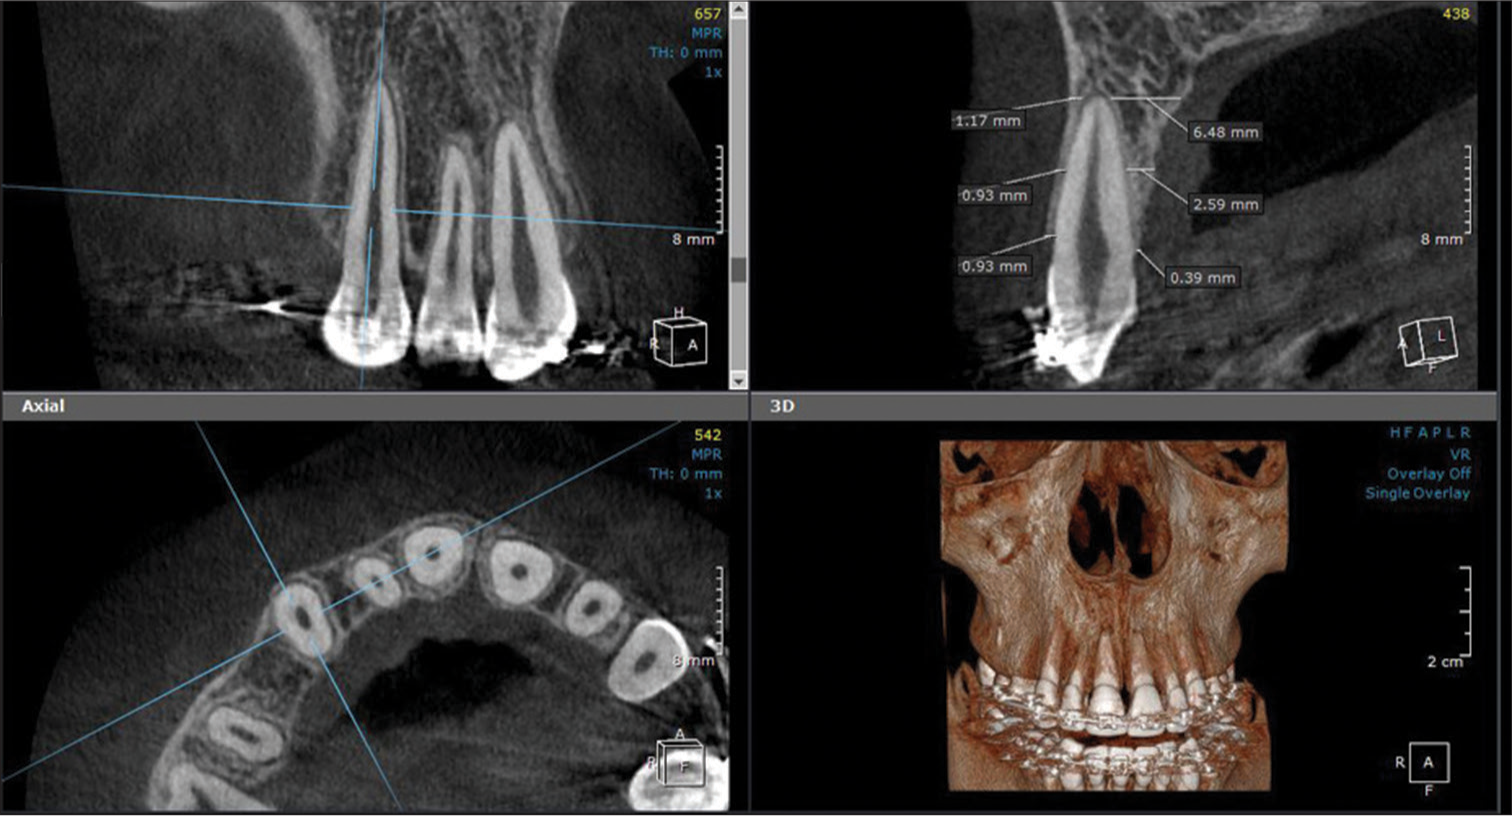 Assessment of alveolar bone thickness on both the buccal and palatal sides of the maxillary canine, at three levels along the canine root: coronal, mid-root, and apical (3D Module, OnDemand3DTM App software).